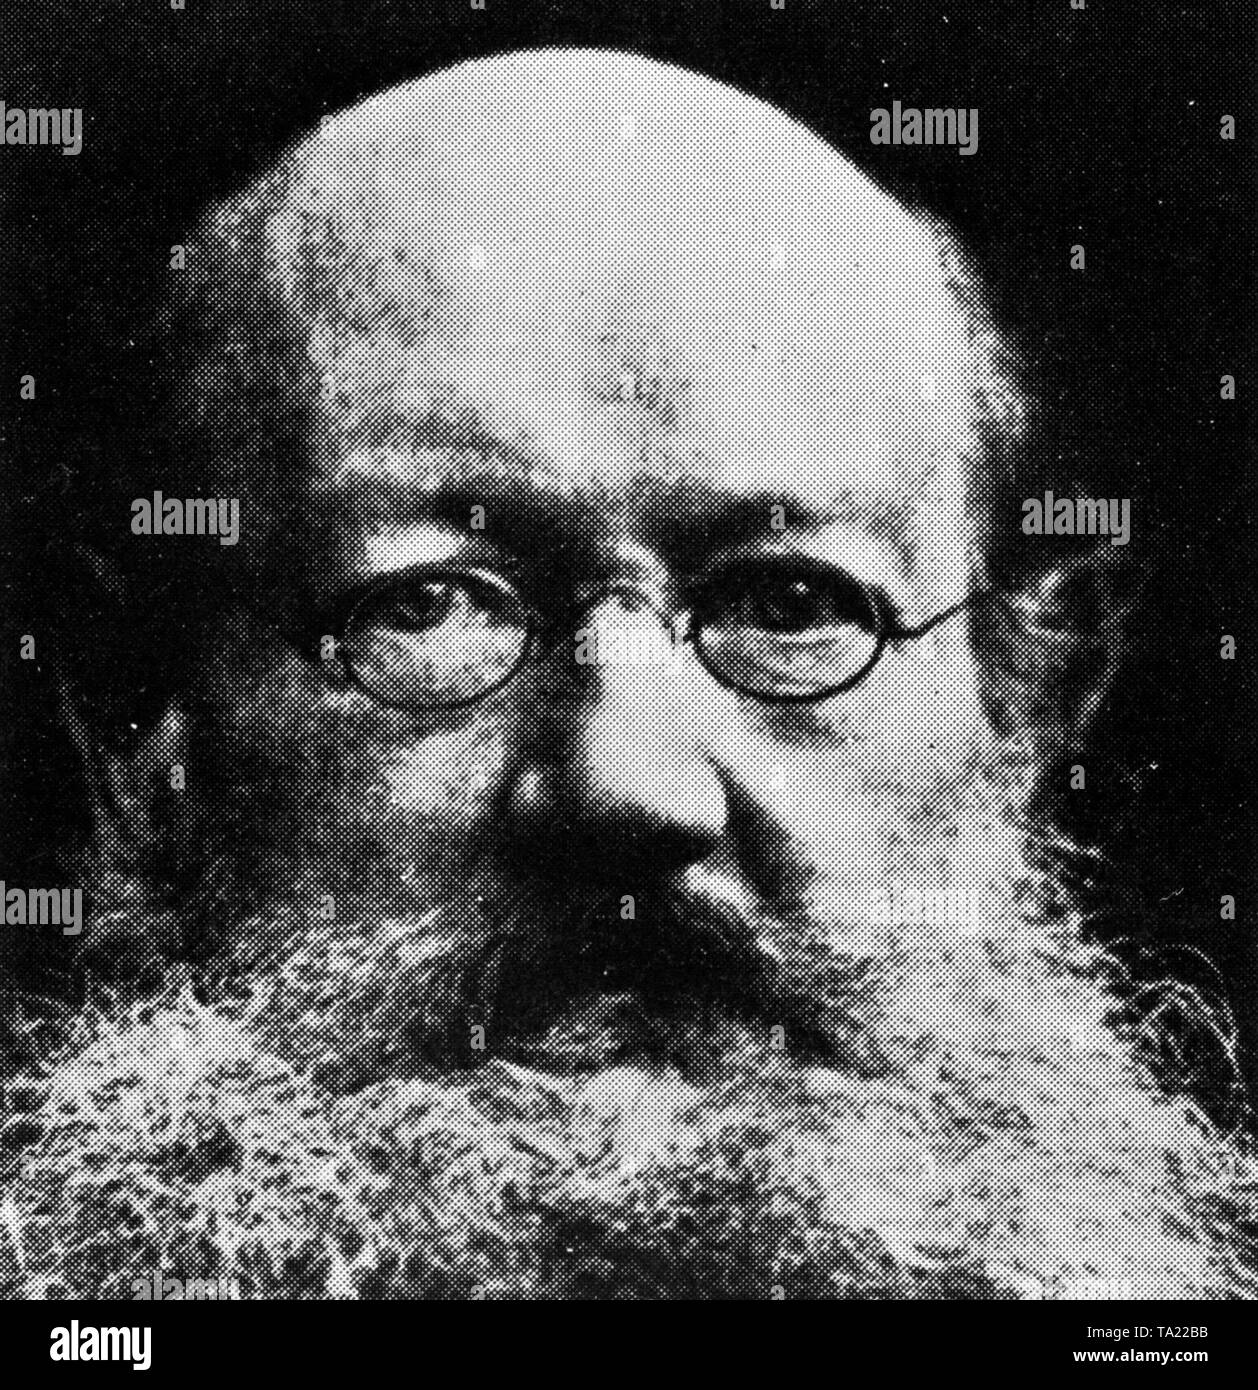 Prince Peter Kropotkin, Russian anarchist. Kropotkin was arrested several times, he emigrated from Russia and returned after the 1917 revolution. In his writings, he emphasized the spontaneous solidarity among people, who should not be forced by government intervention. Stock Photo